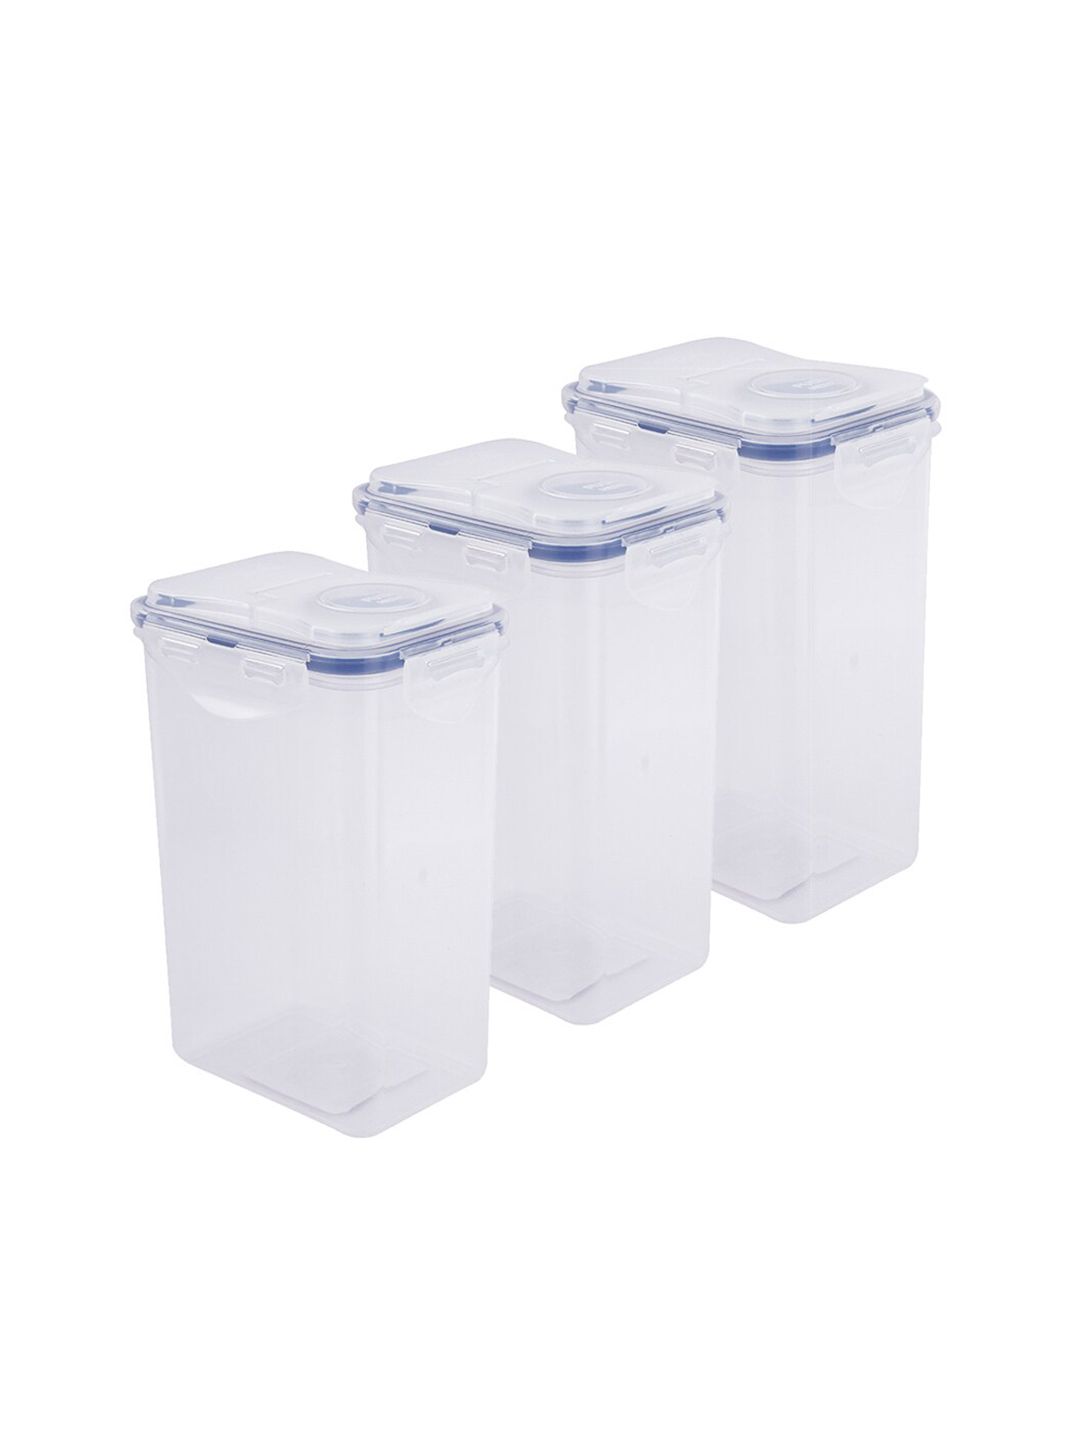 Lock & Lock Set of 3 Transparent Solid Plastic Kitchen Storage Containers Price in India